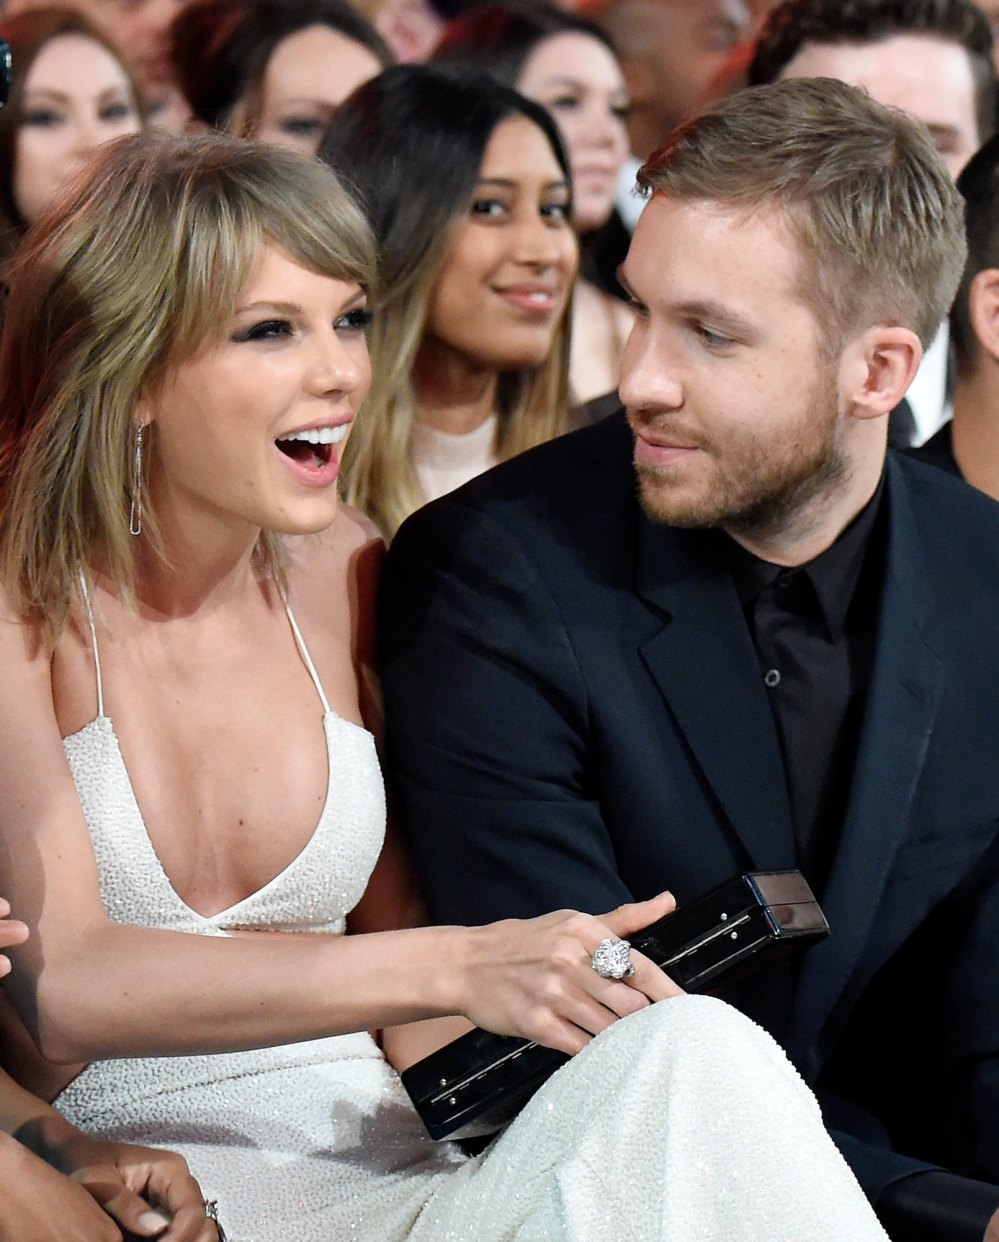 Taylor Swift and Calvin Harris Relationship Timeline